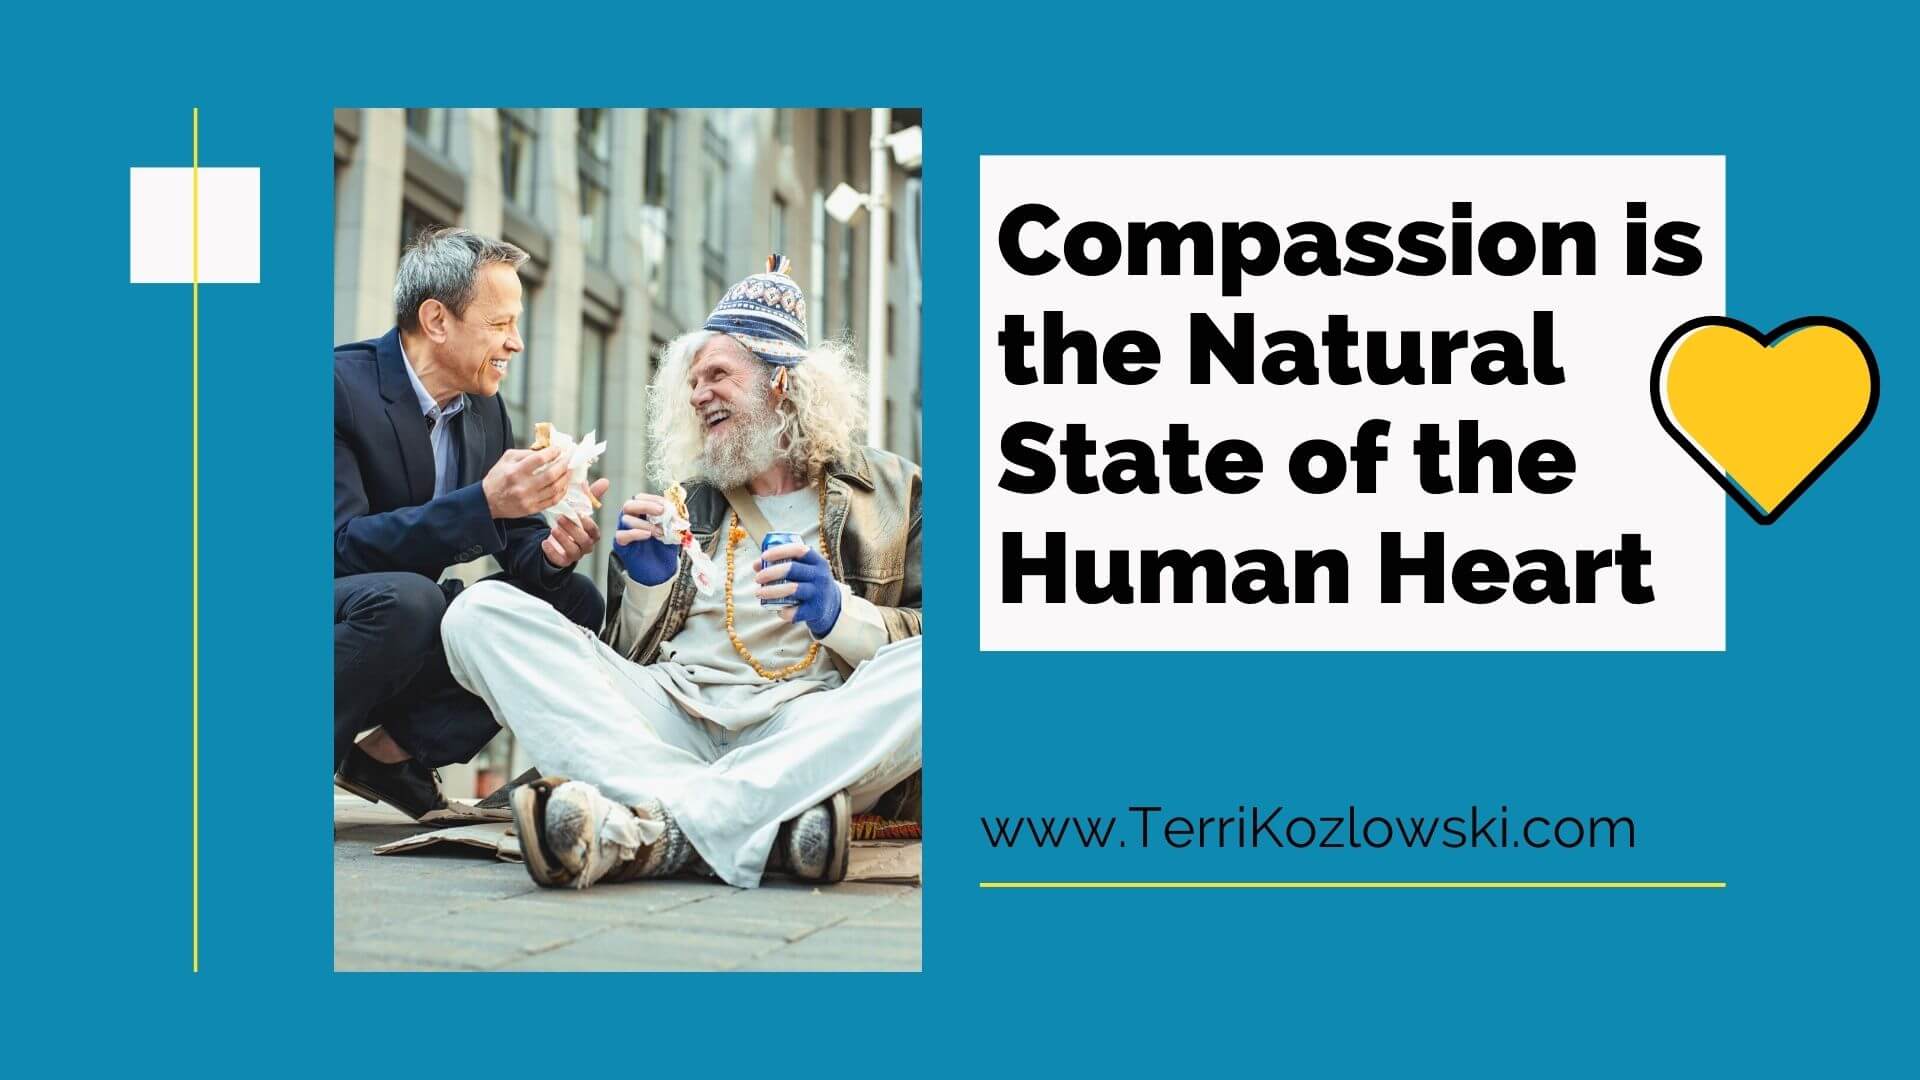 Compassion is the Natural State of the Human Heart